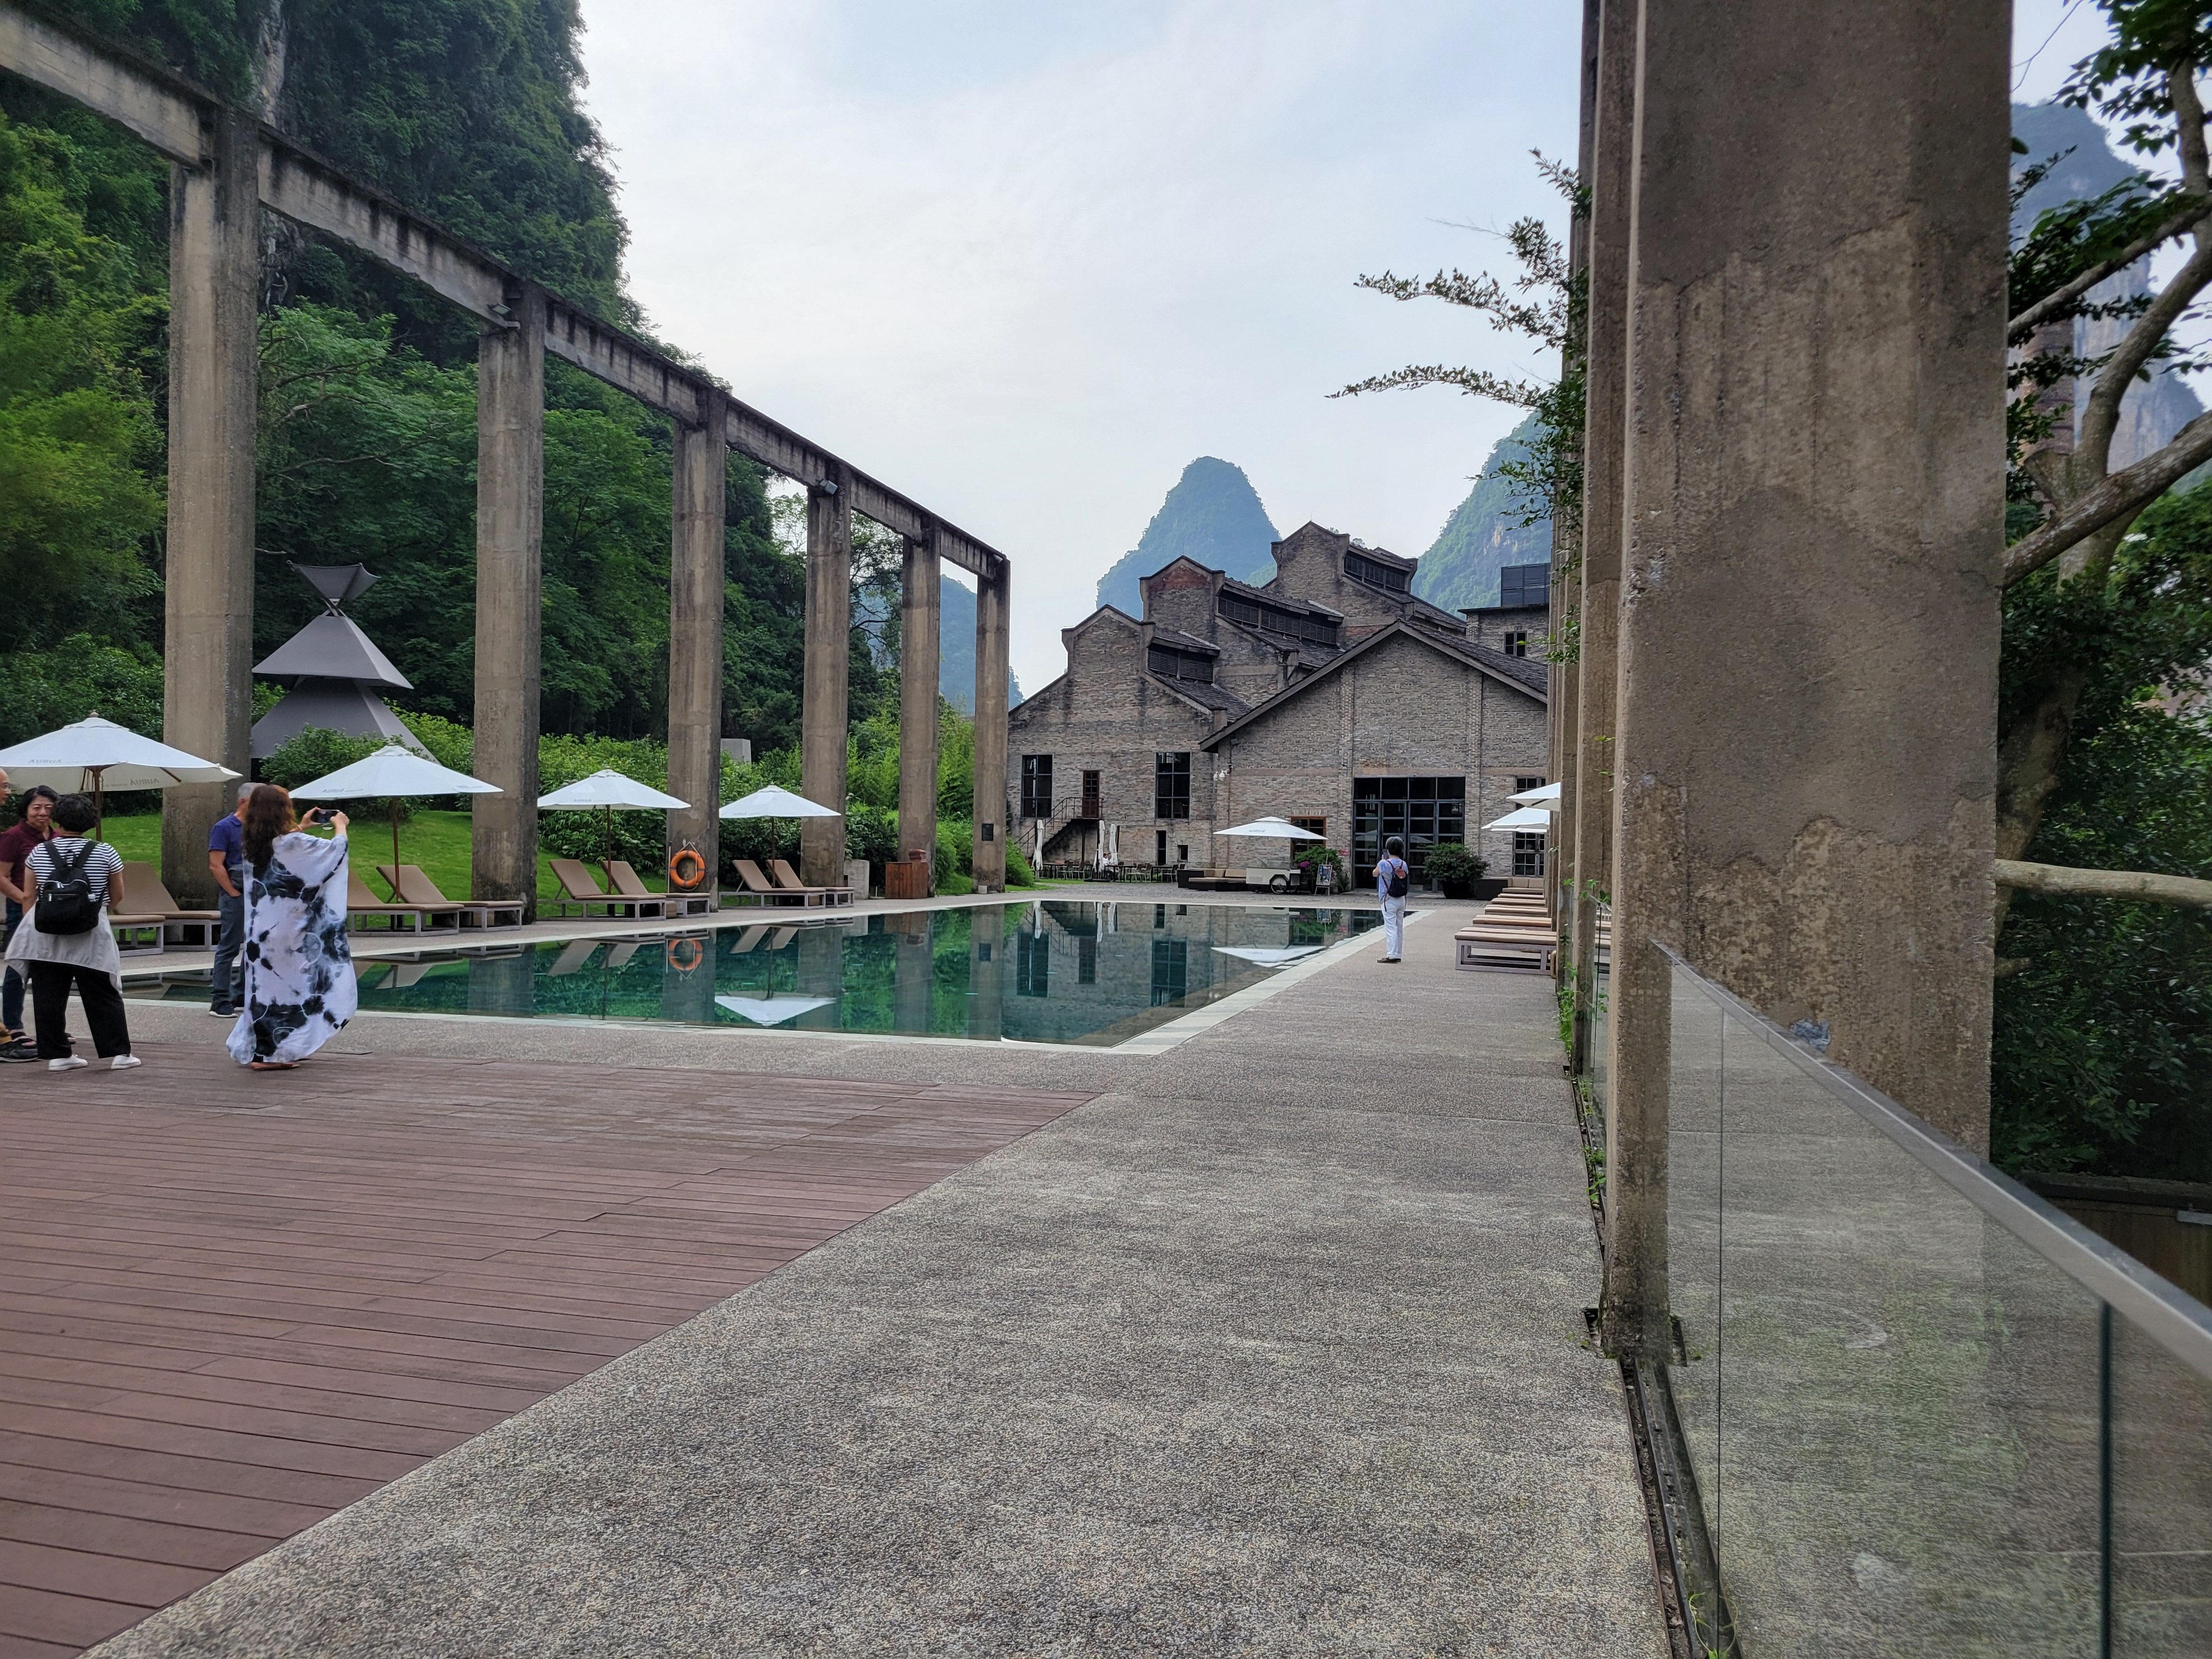 The Yangshuo Sugar House pool is surrounded by concrete pillars left behind from the site’s factory days. Photo: Kristian Odebjer